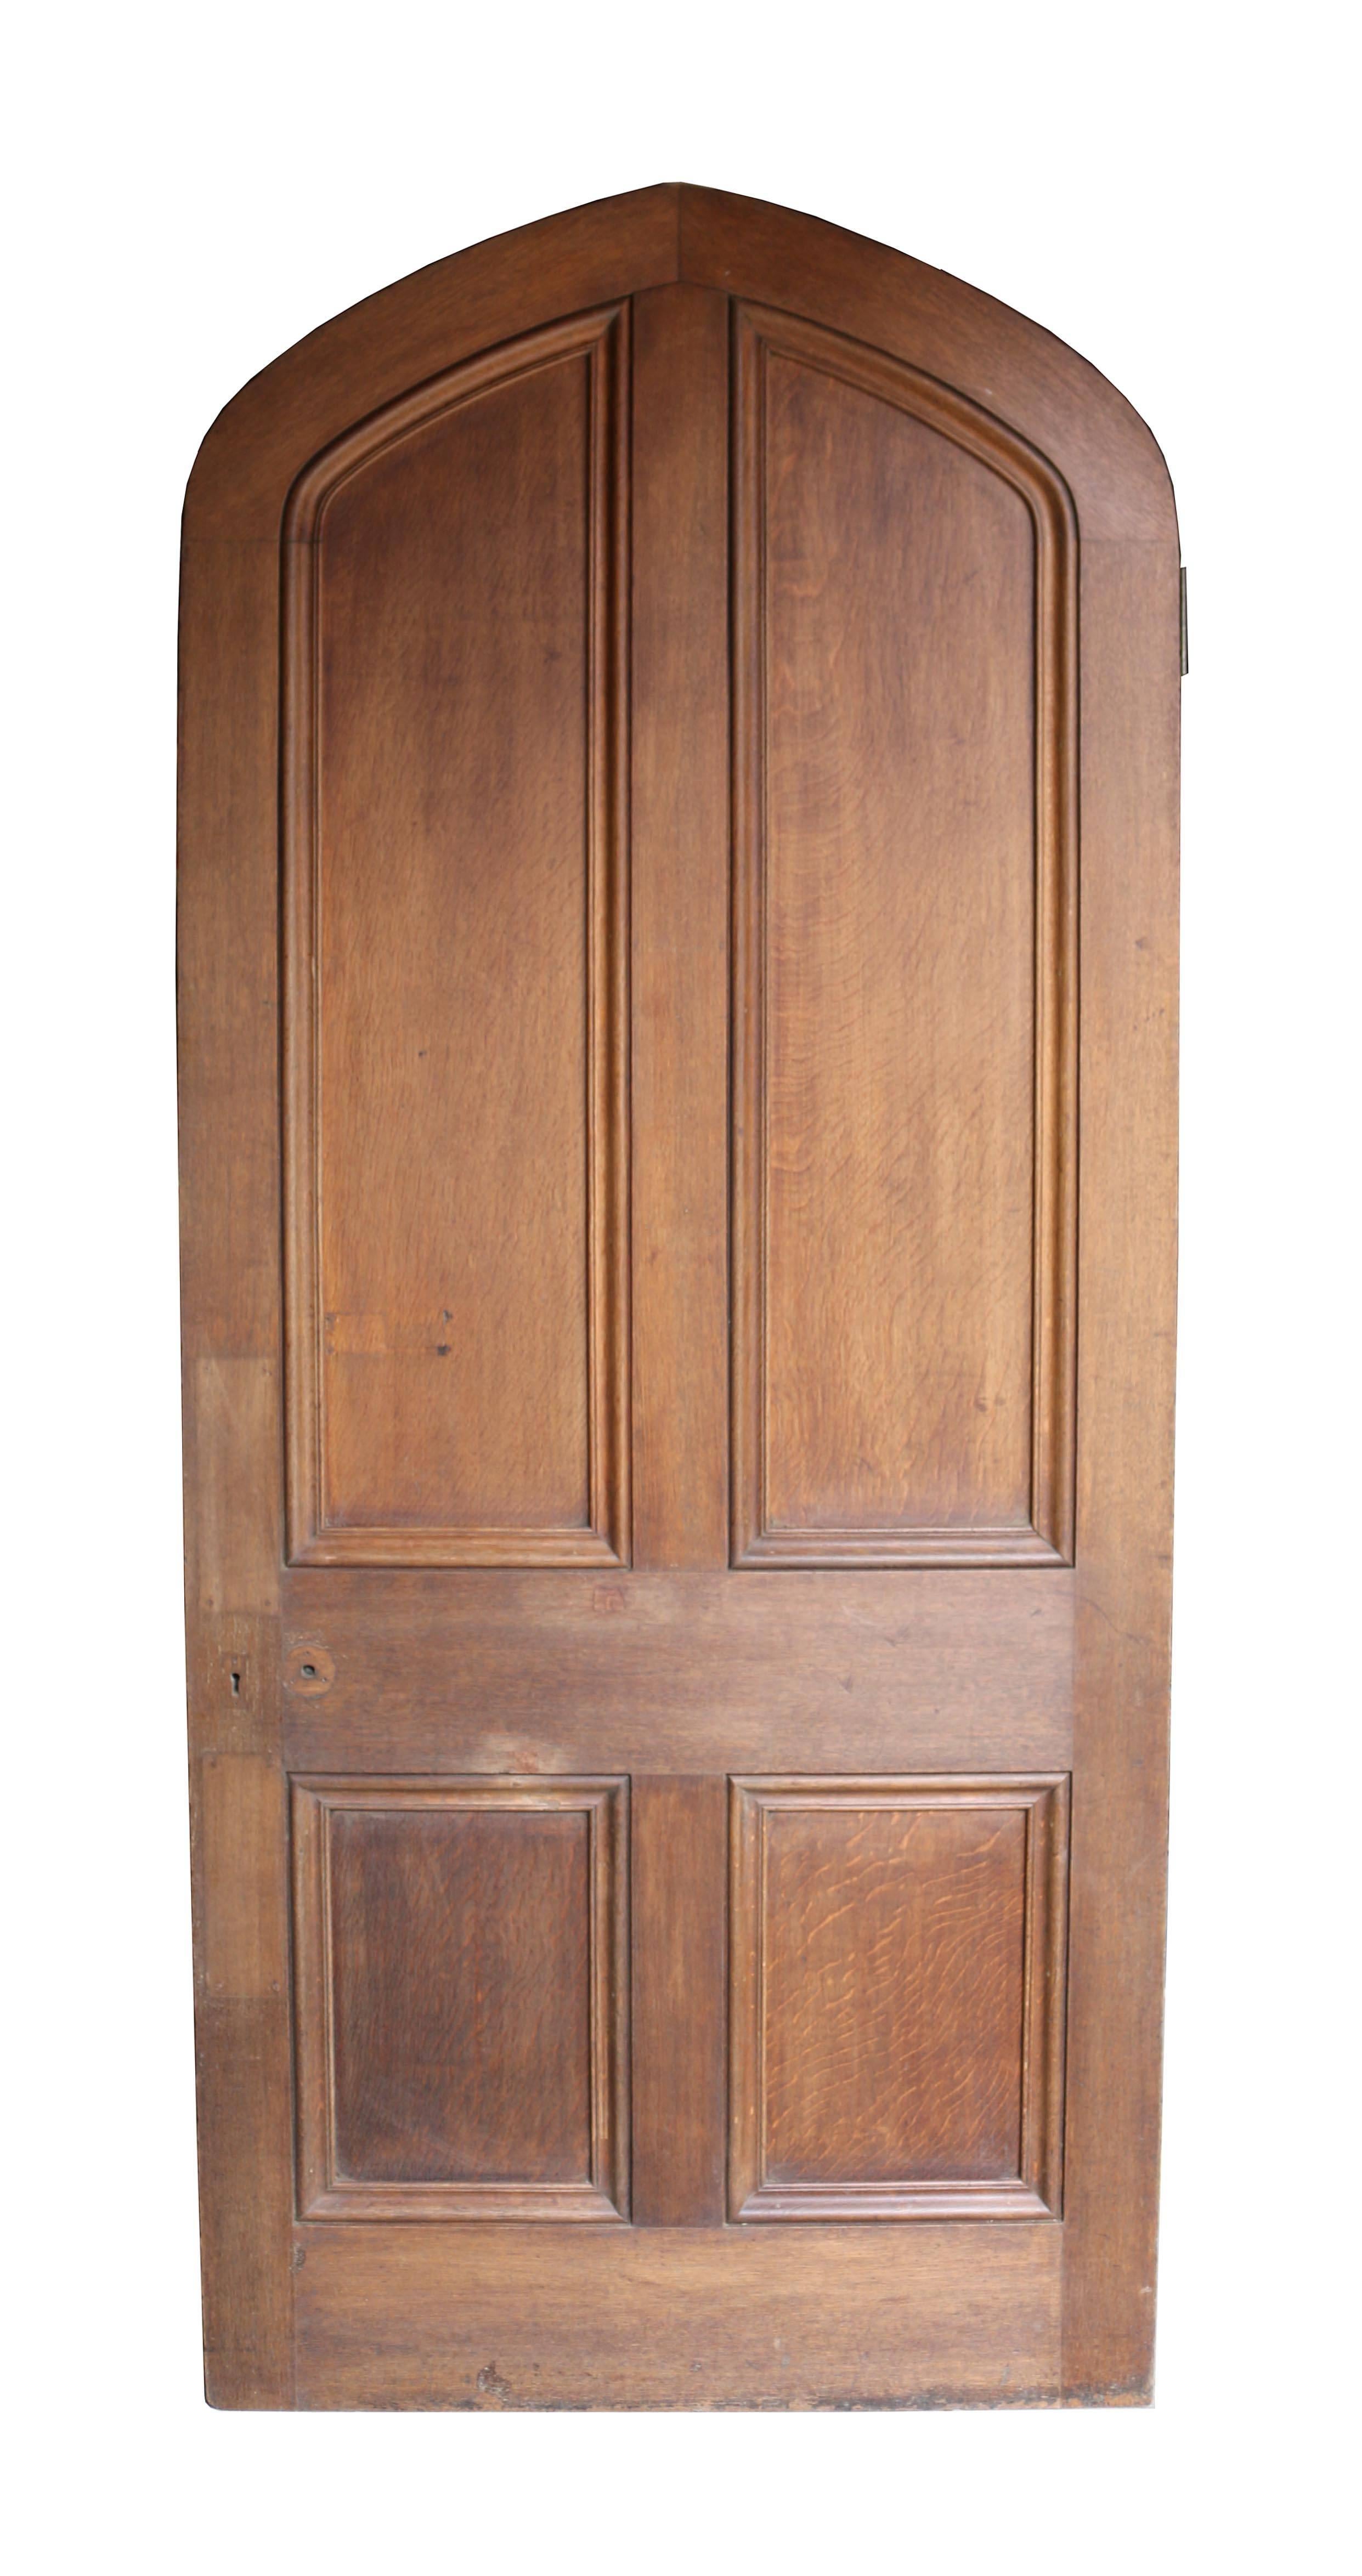 Very good quality oak door with original brass hinges. Stripped finish.